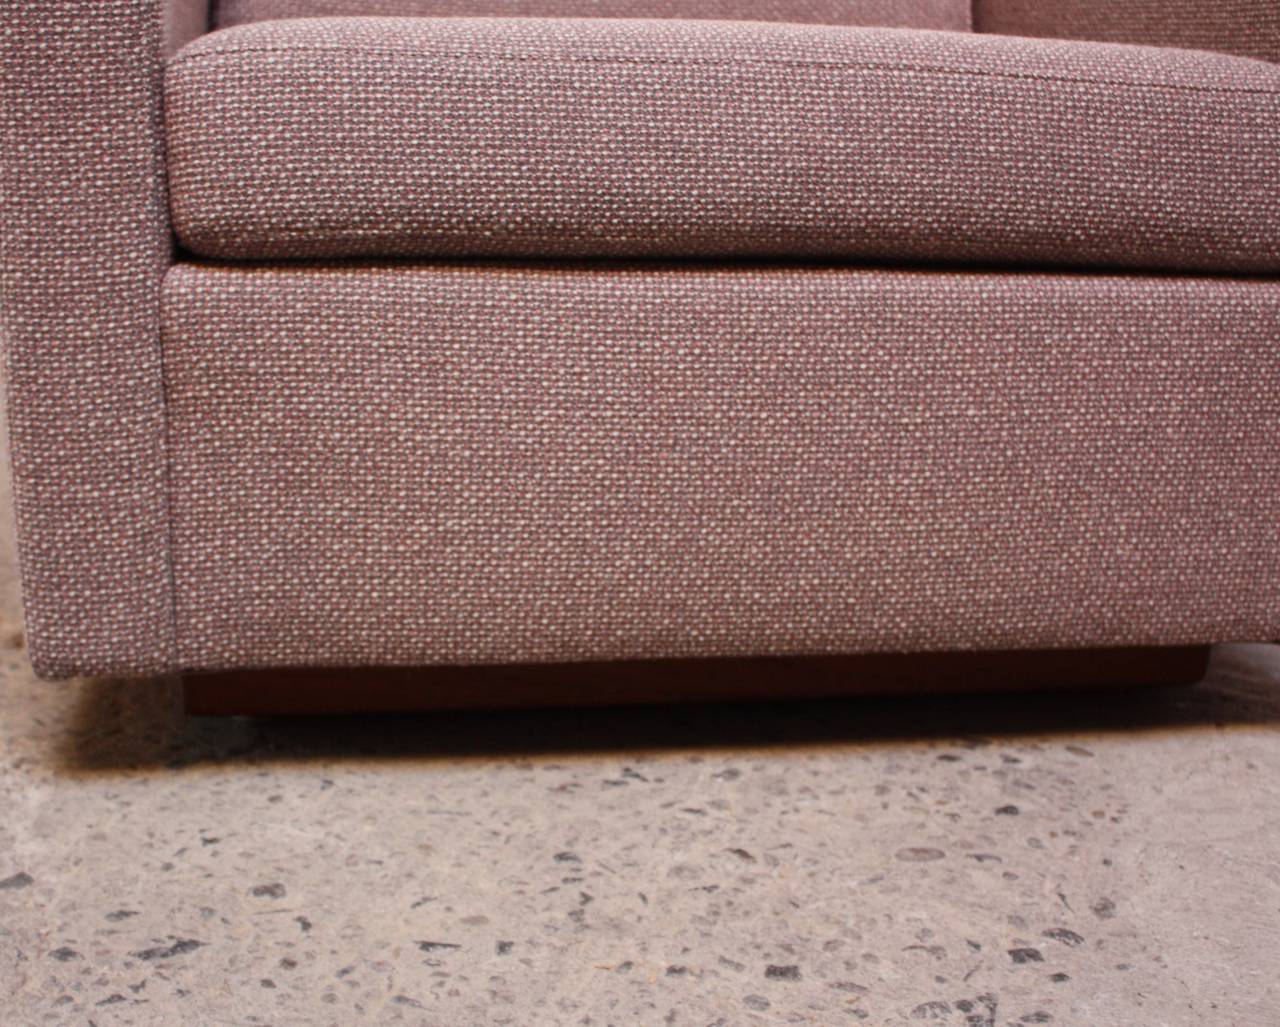 These Jack Cartwright cube lounge chairs sit on a walnut plinth base and retain their original wool tweed fabric. (The colors of the fabric are lavender, pink, and grey.) The Jack Cartwright fabric tags are intact.
The arm height is 23